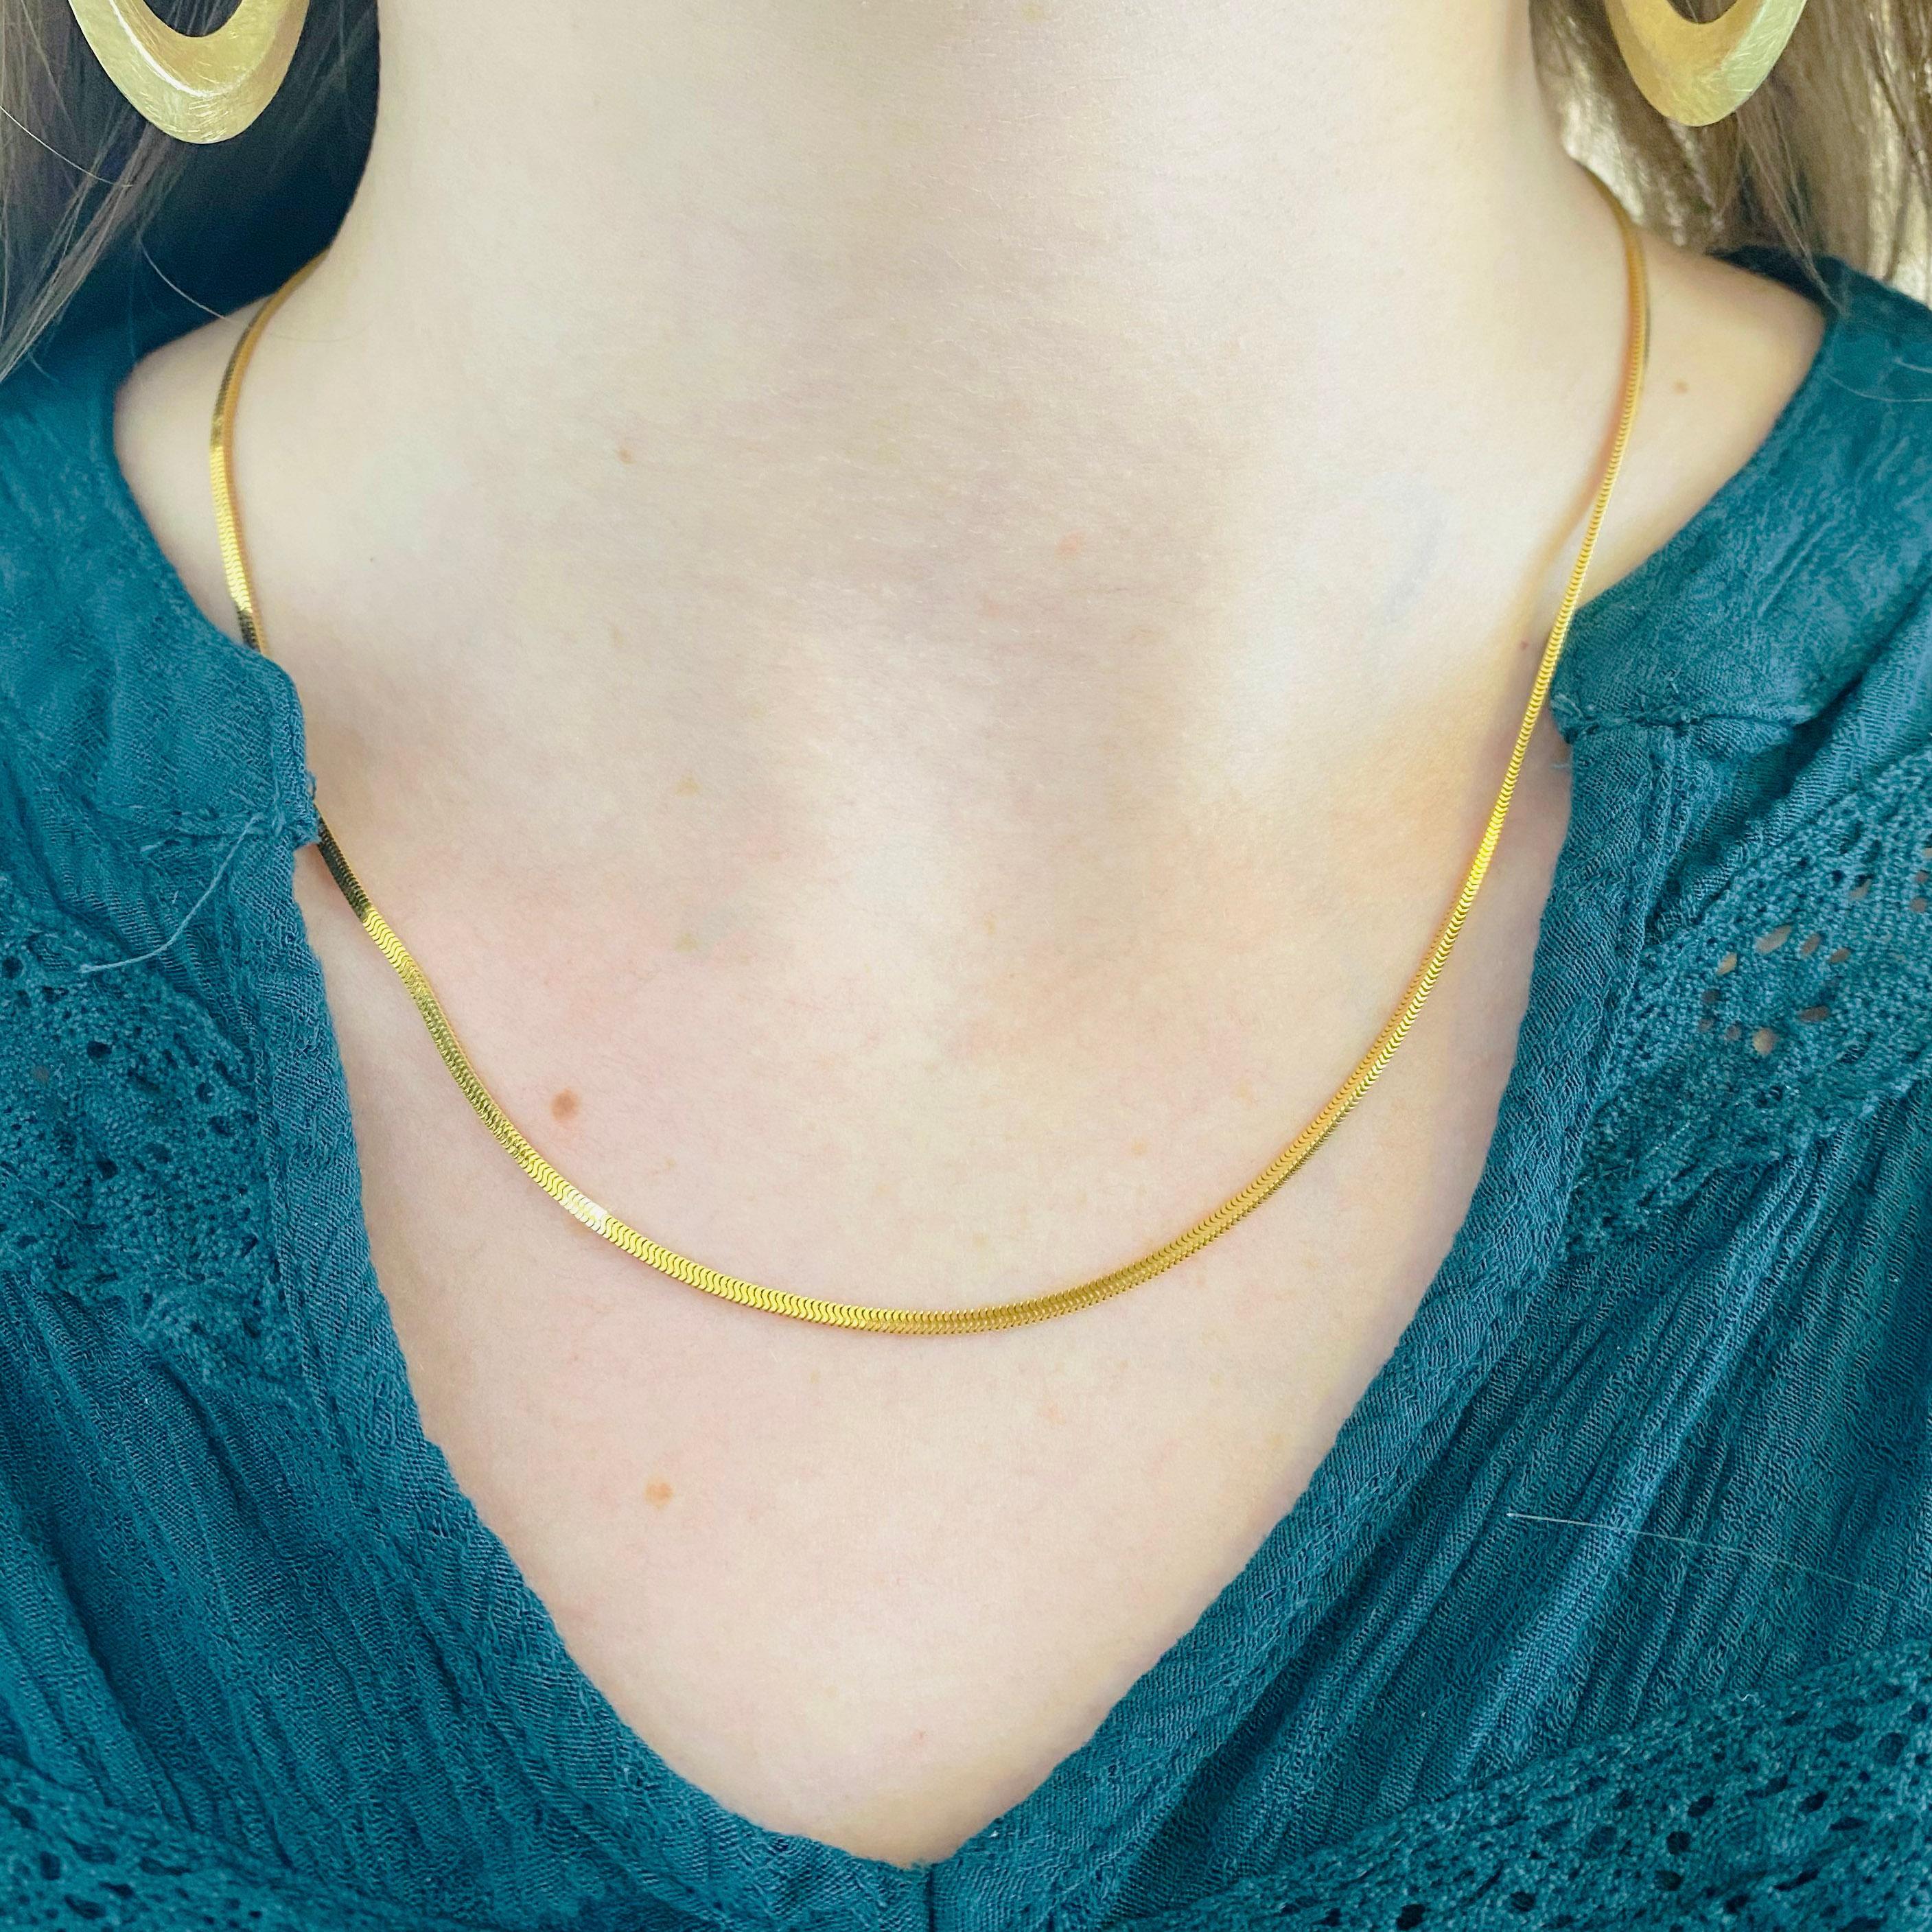 This snake box chain is fluid and flexible and lays against the skin for a comfortable wear. This hand polished 14kt snake chain is a unique chain look that’s sure to get you noticed.

The details for this beautiful necklace are listed below:
Metal